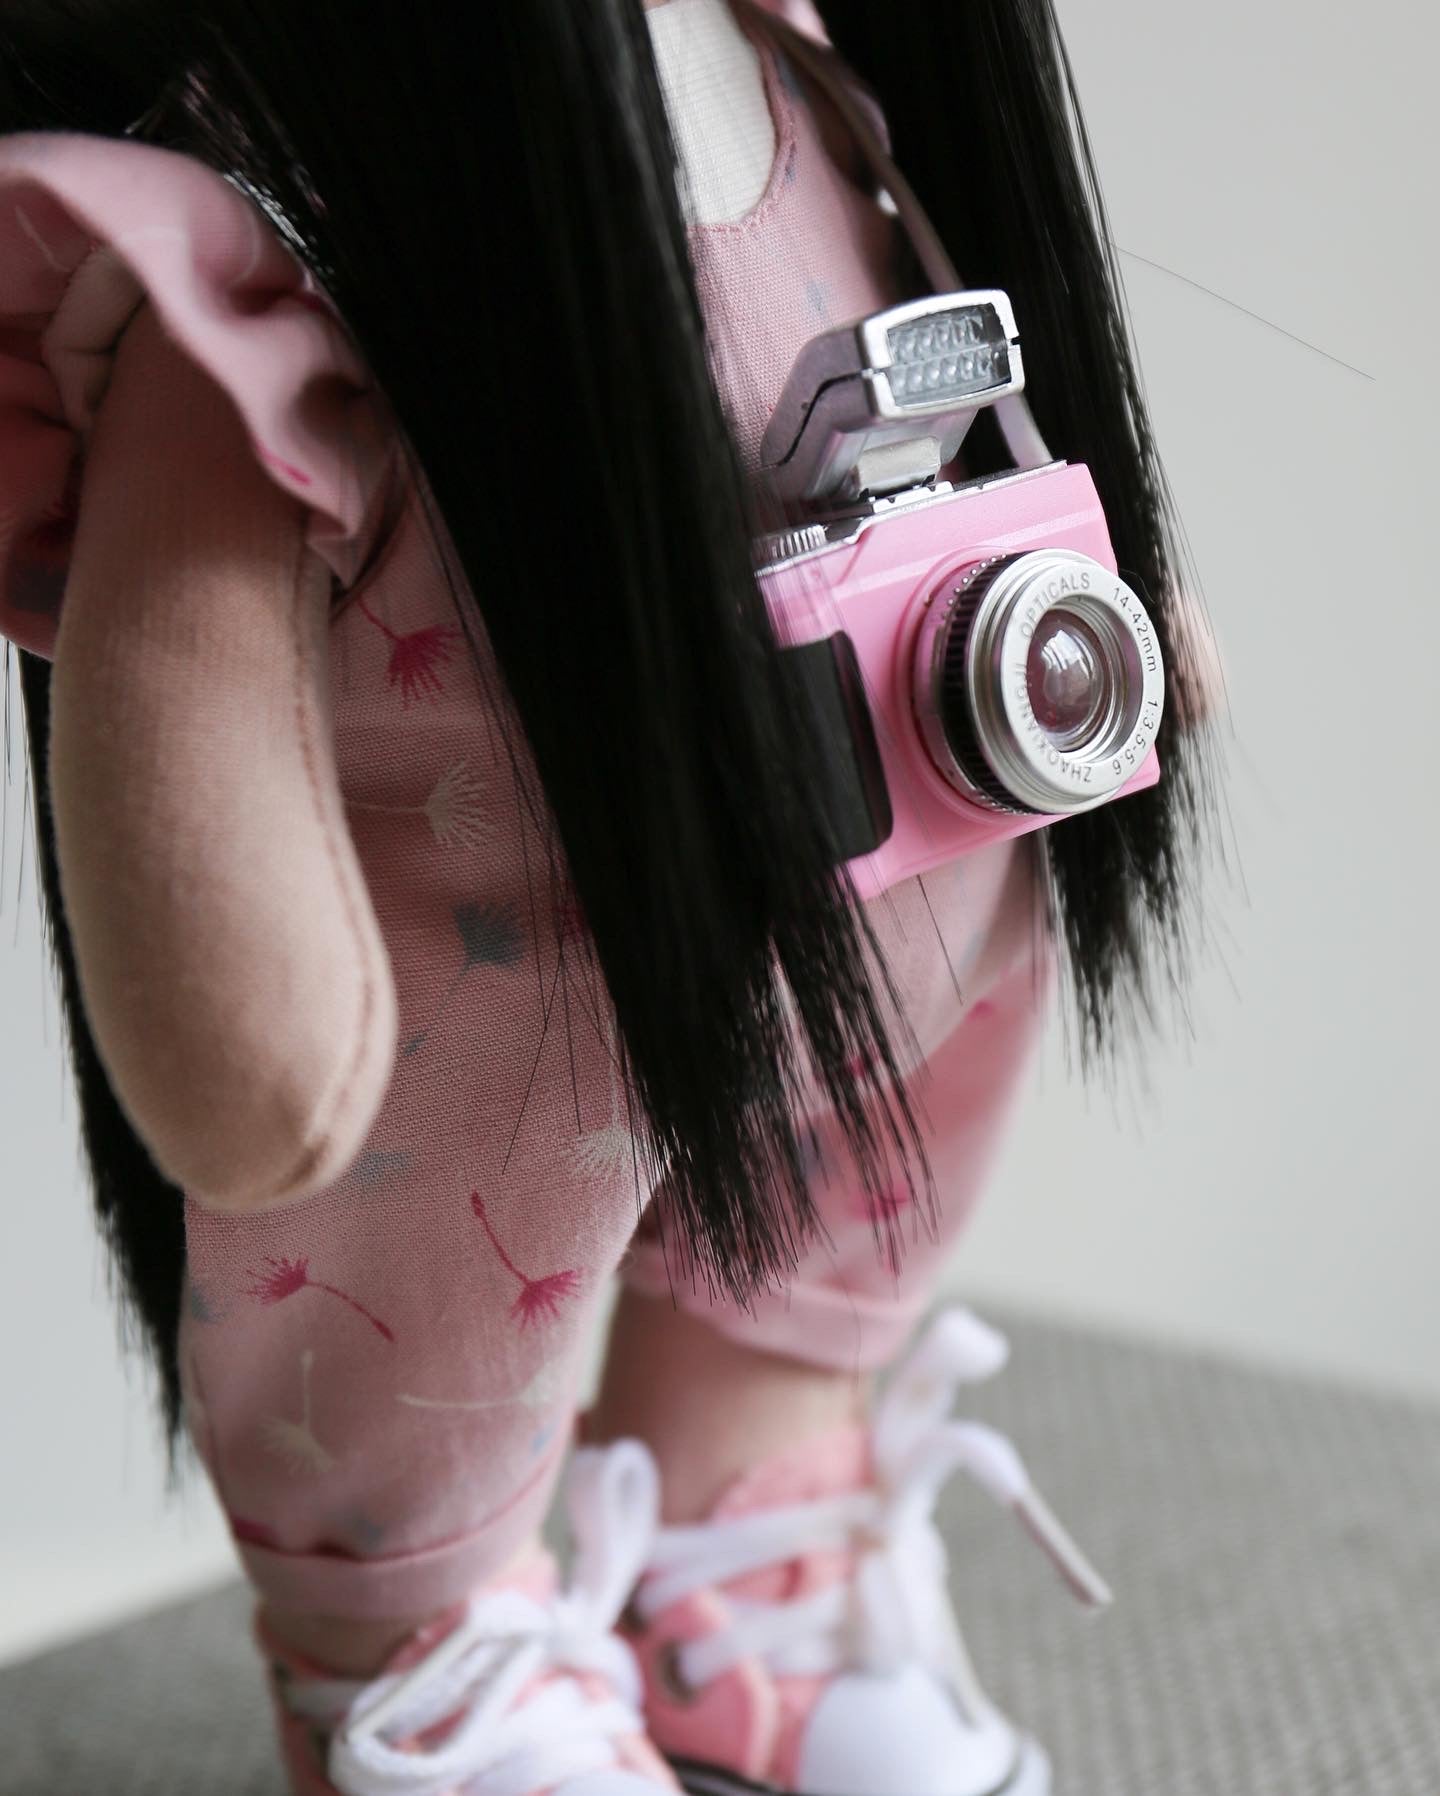 Pink photograph interior doll with a camera